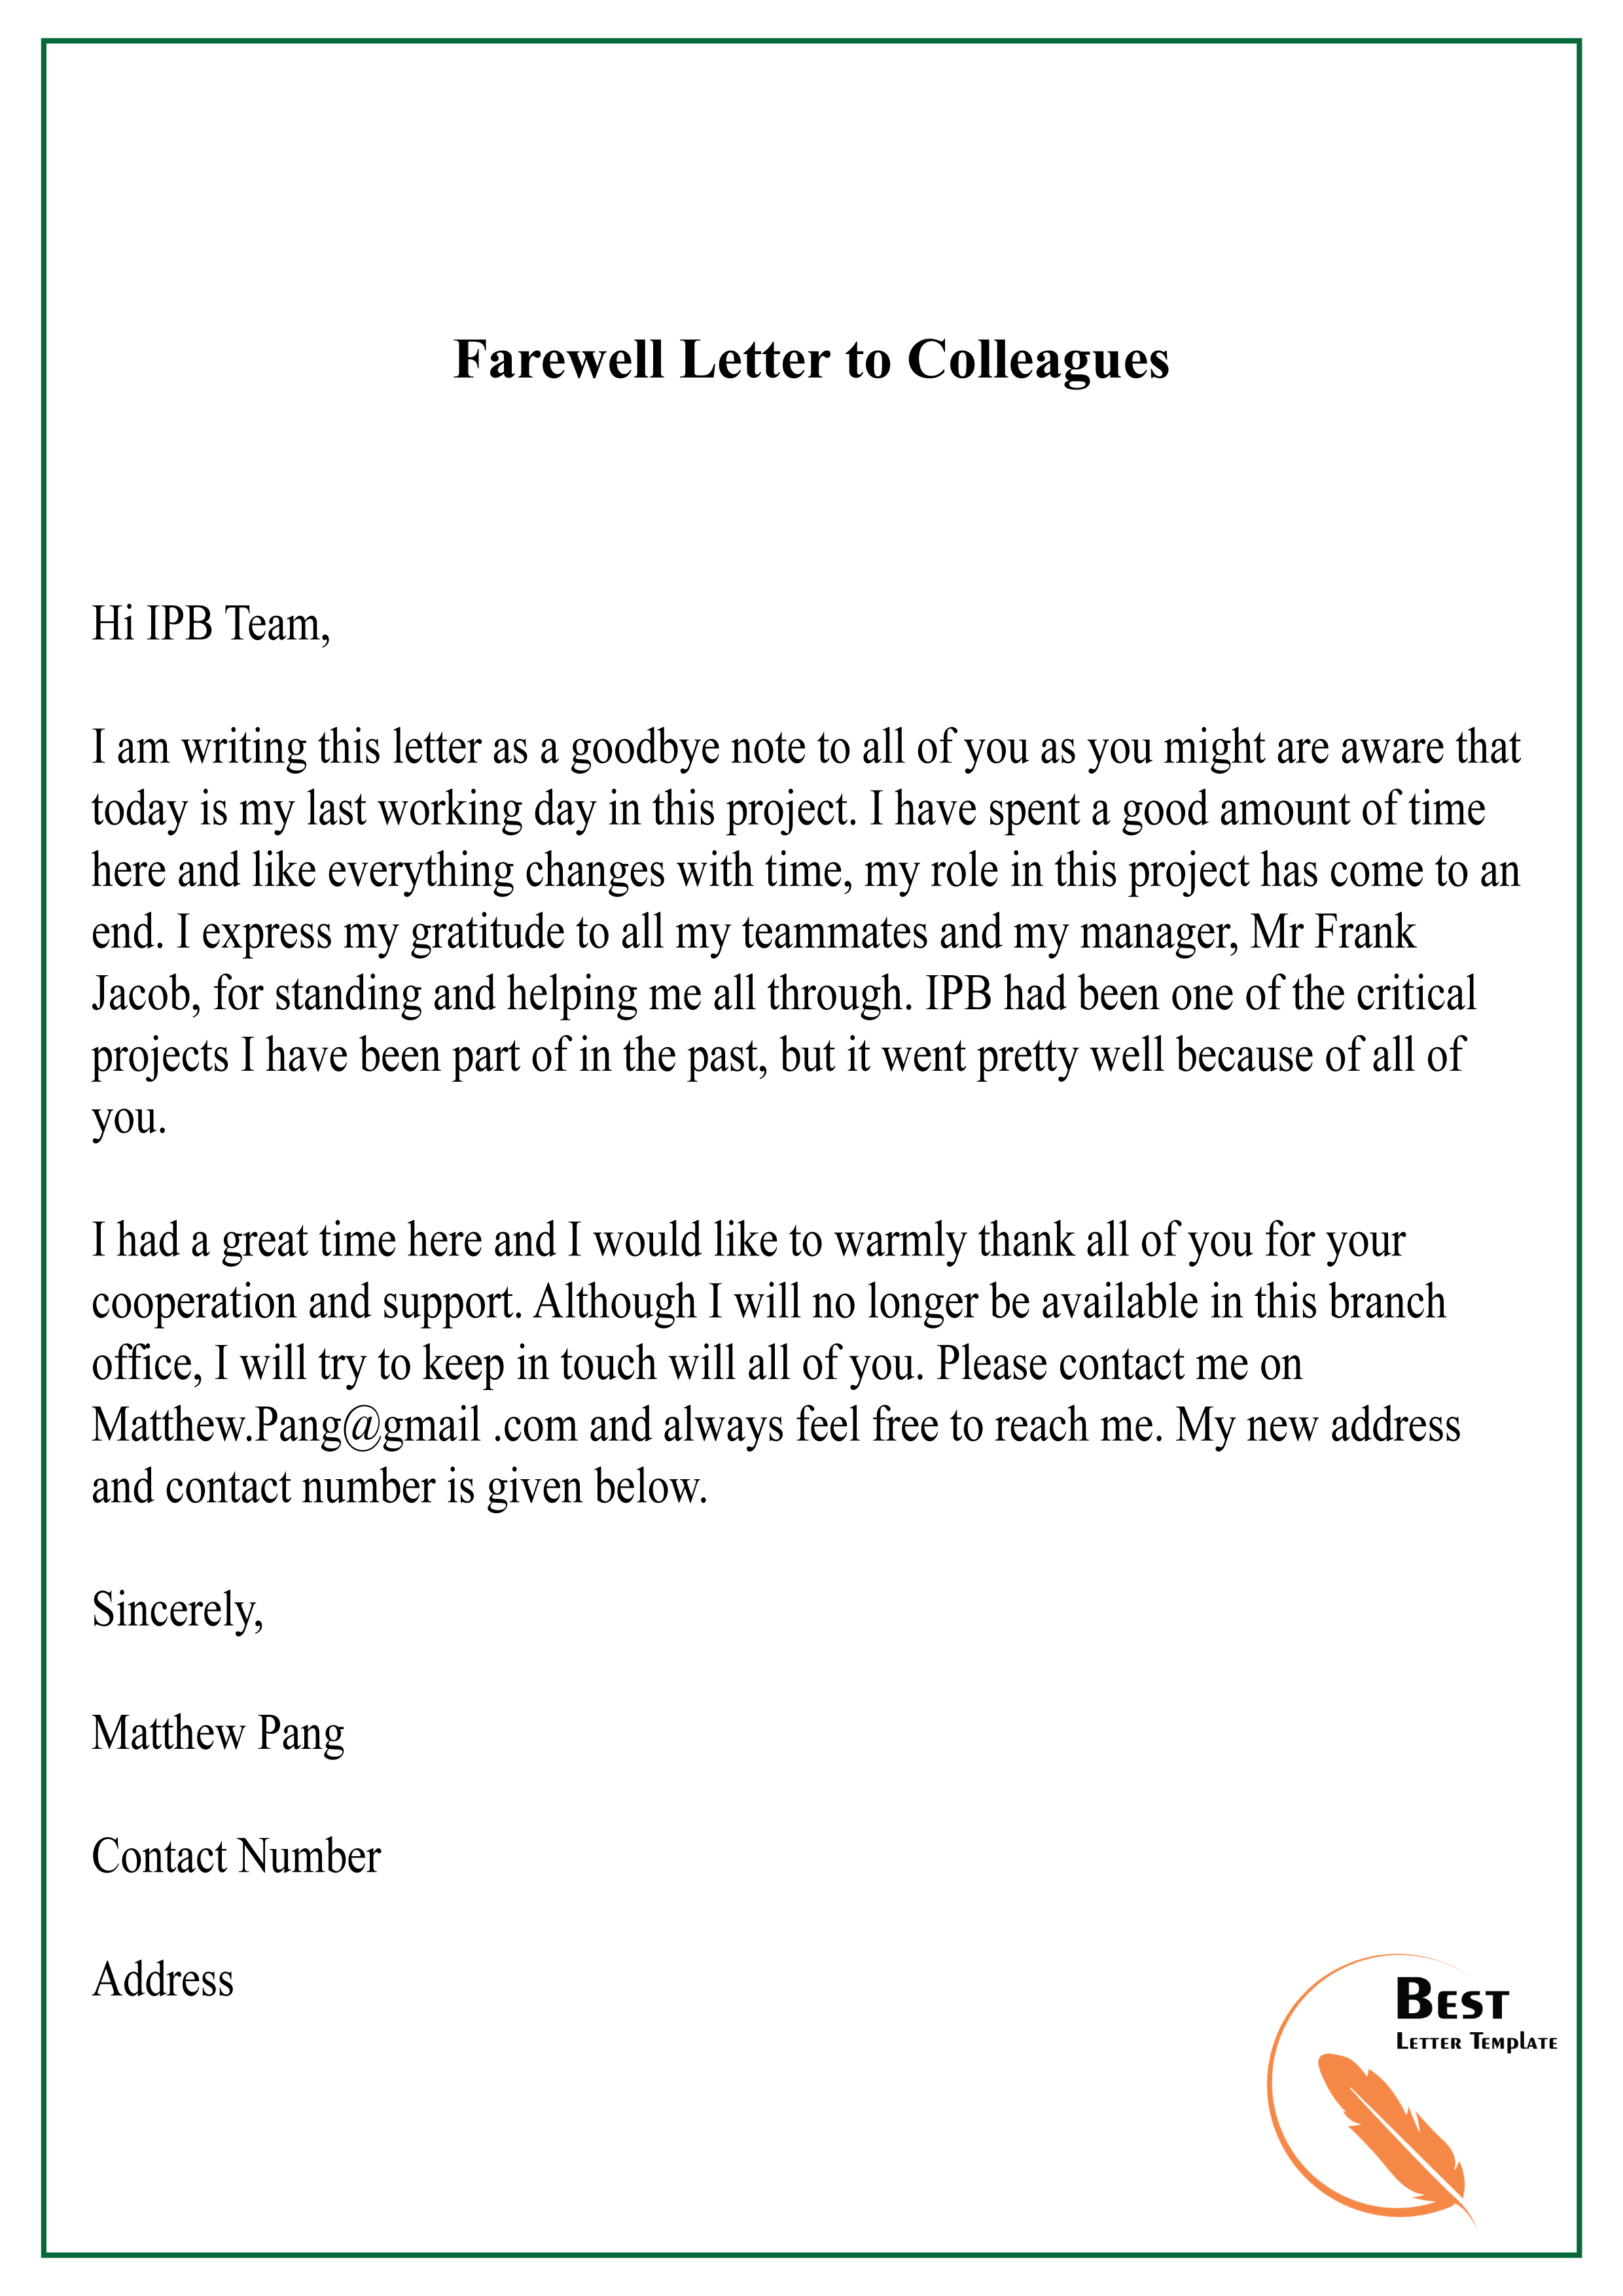 Farewell Email Template To Colleagues